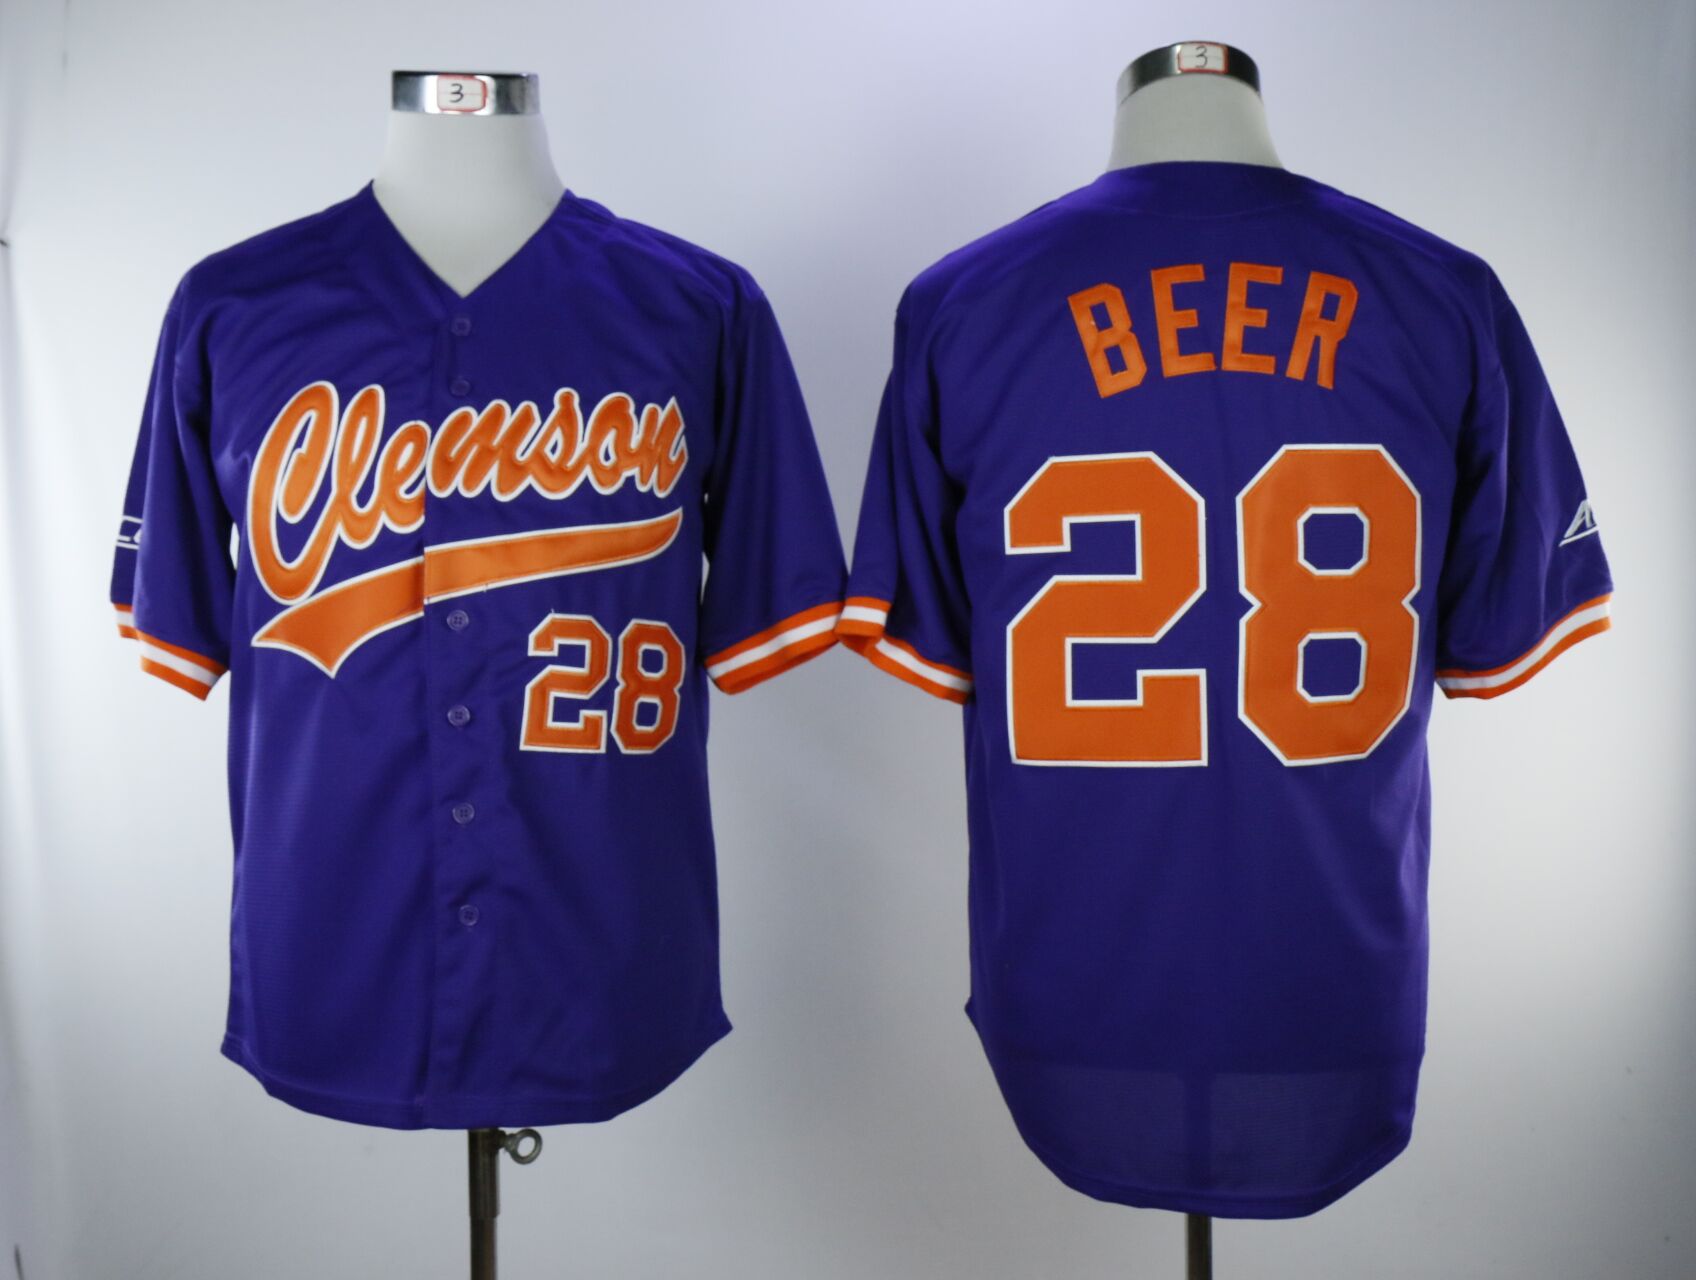 MLB Baltimore Orioles #28 Beer Blue Jersey